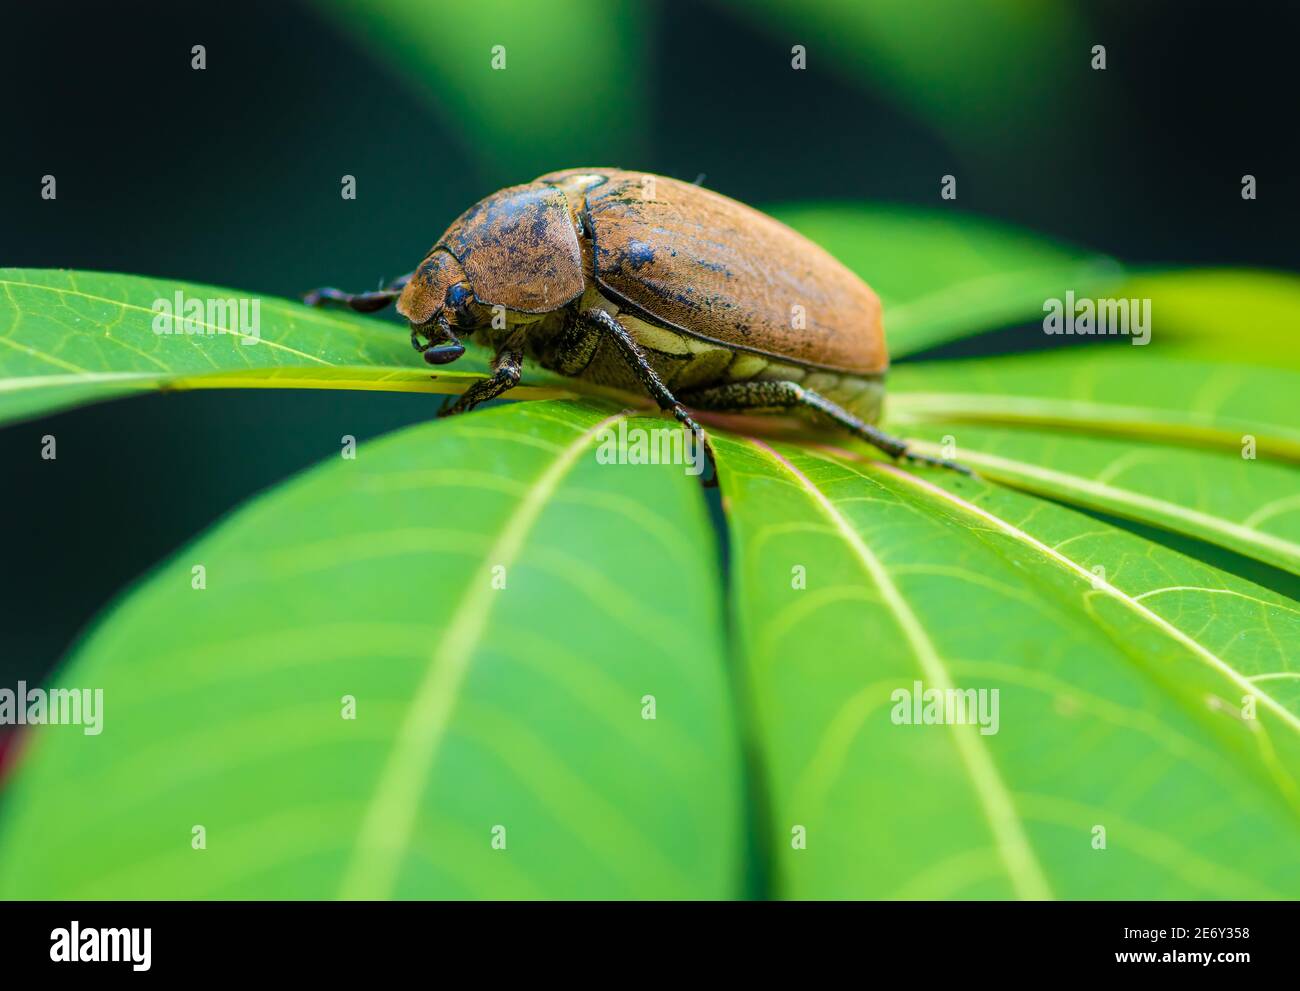 Orange-brown color Old Beetle on a vibrant green leaf, macro close up wildlife photo. Stock Photo